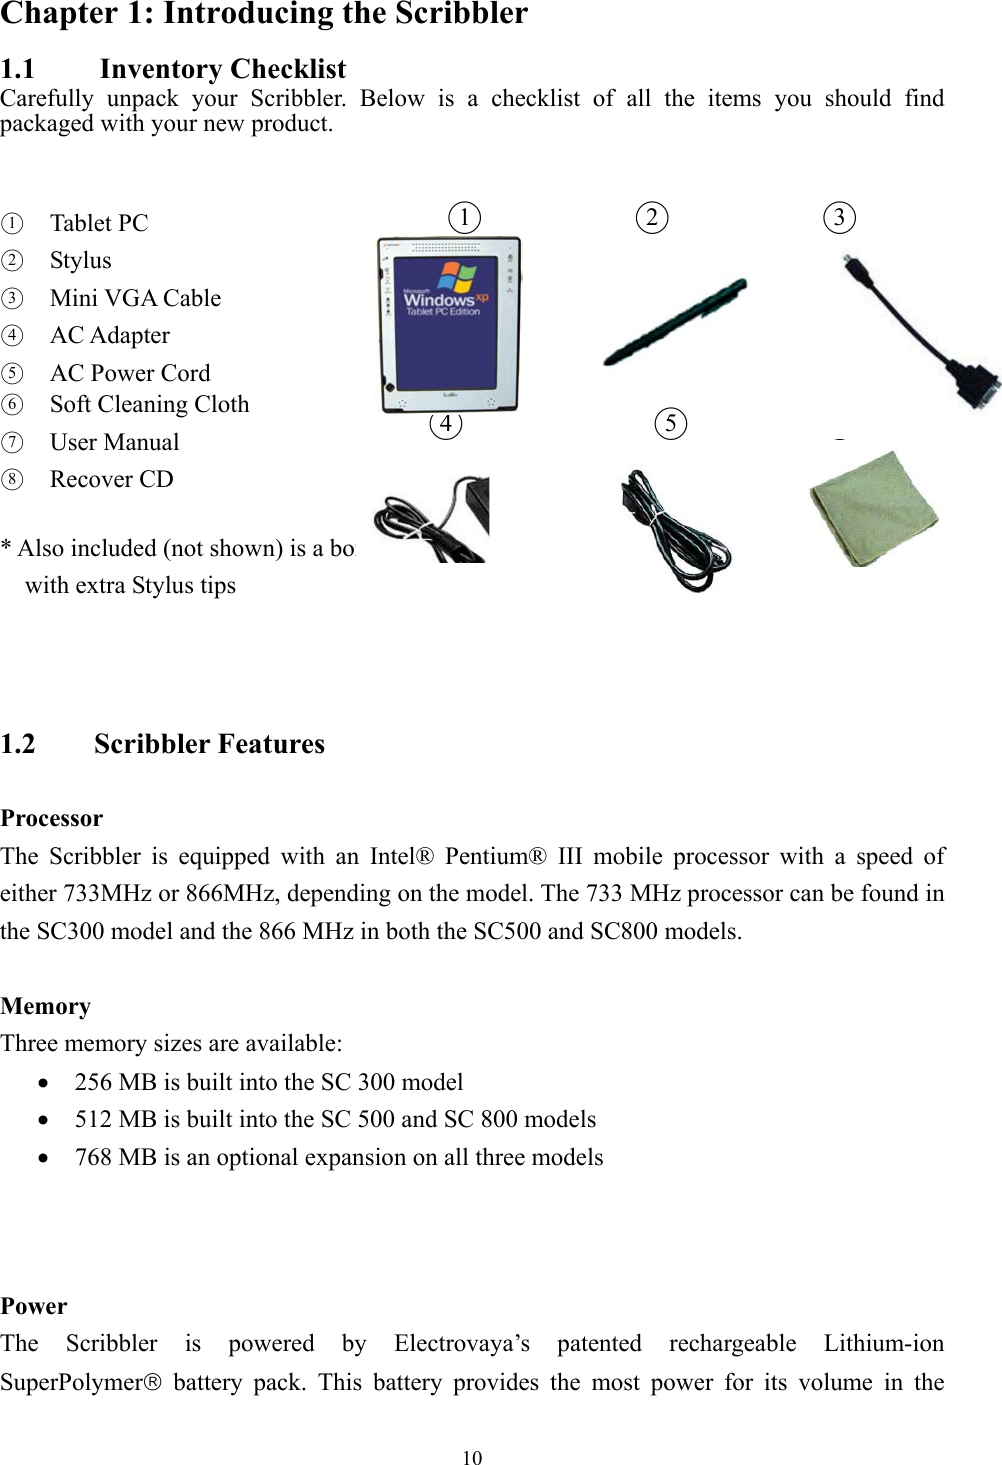 Chapter 1: Introducing the Scribbler 1.1   Inventory Checklist Carefully unpack your Scribbler. Below is a checklist of all the items you should find packaged with your new product.               ○2○3 ○5○6                          ○1  Tablet PC  ○2  Stylus  ○3  Mini VGA Cable ○4  AC Adapter ○5  AC Power Cord  ○6  Soft Cleaning Cloth ○7  User Manual  ○8  Recover CD  * Also included (not shown) is a box   ○1○4    with extra Stylus tips    1.2    Scribbler Features   Processor The Scribbler is equipped with an Intel® Pentium® III mobile processor with a speed of either 733MHz or 866MHz, depending on the model. The 733 MHz processor can be found in the SC300 model and the 866 MHz in both the SC500 and SC800 models.    Memory Three memory sizes are available: •  256 MB is built into the SC 300 model •  512 MB is built into the SC 500 and SC 800 models •  768 MB is an optional expansion on all three models      Power The Scribbler is powered by Electrovaya’s patented rechargeable Lithium-ion SuperPolymer battery pack. This battery provides the most power for its volume in the  10